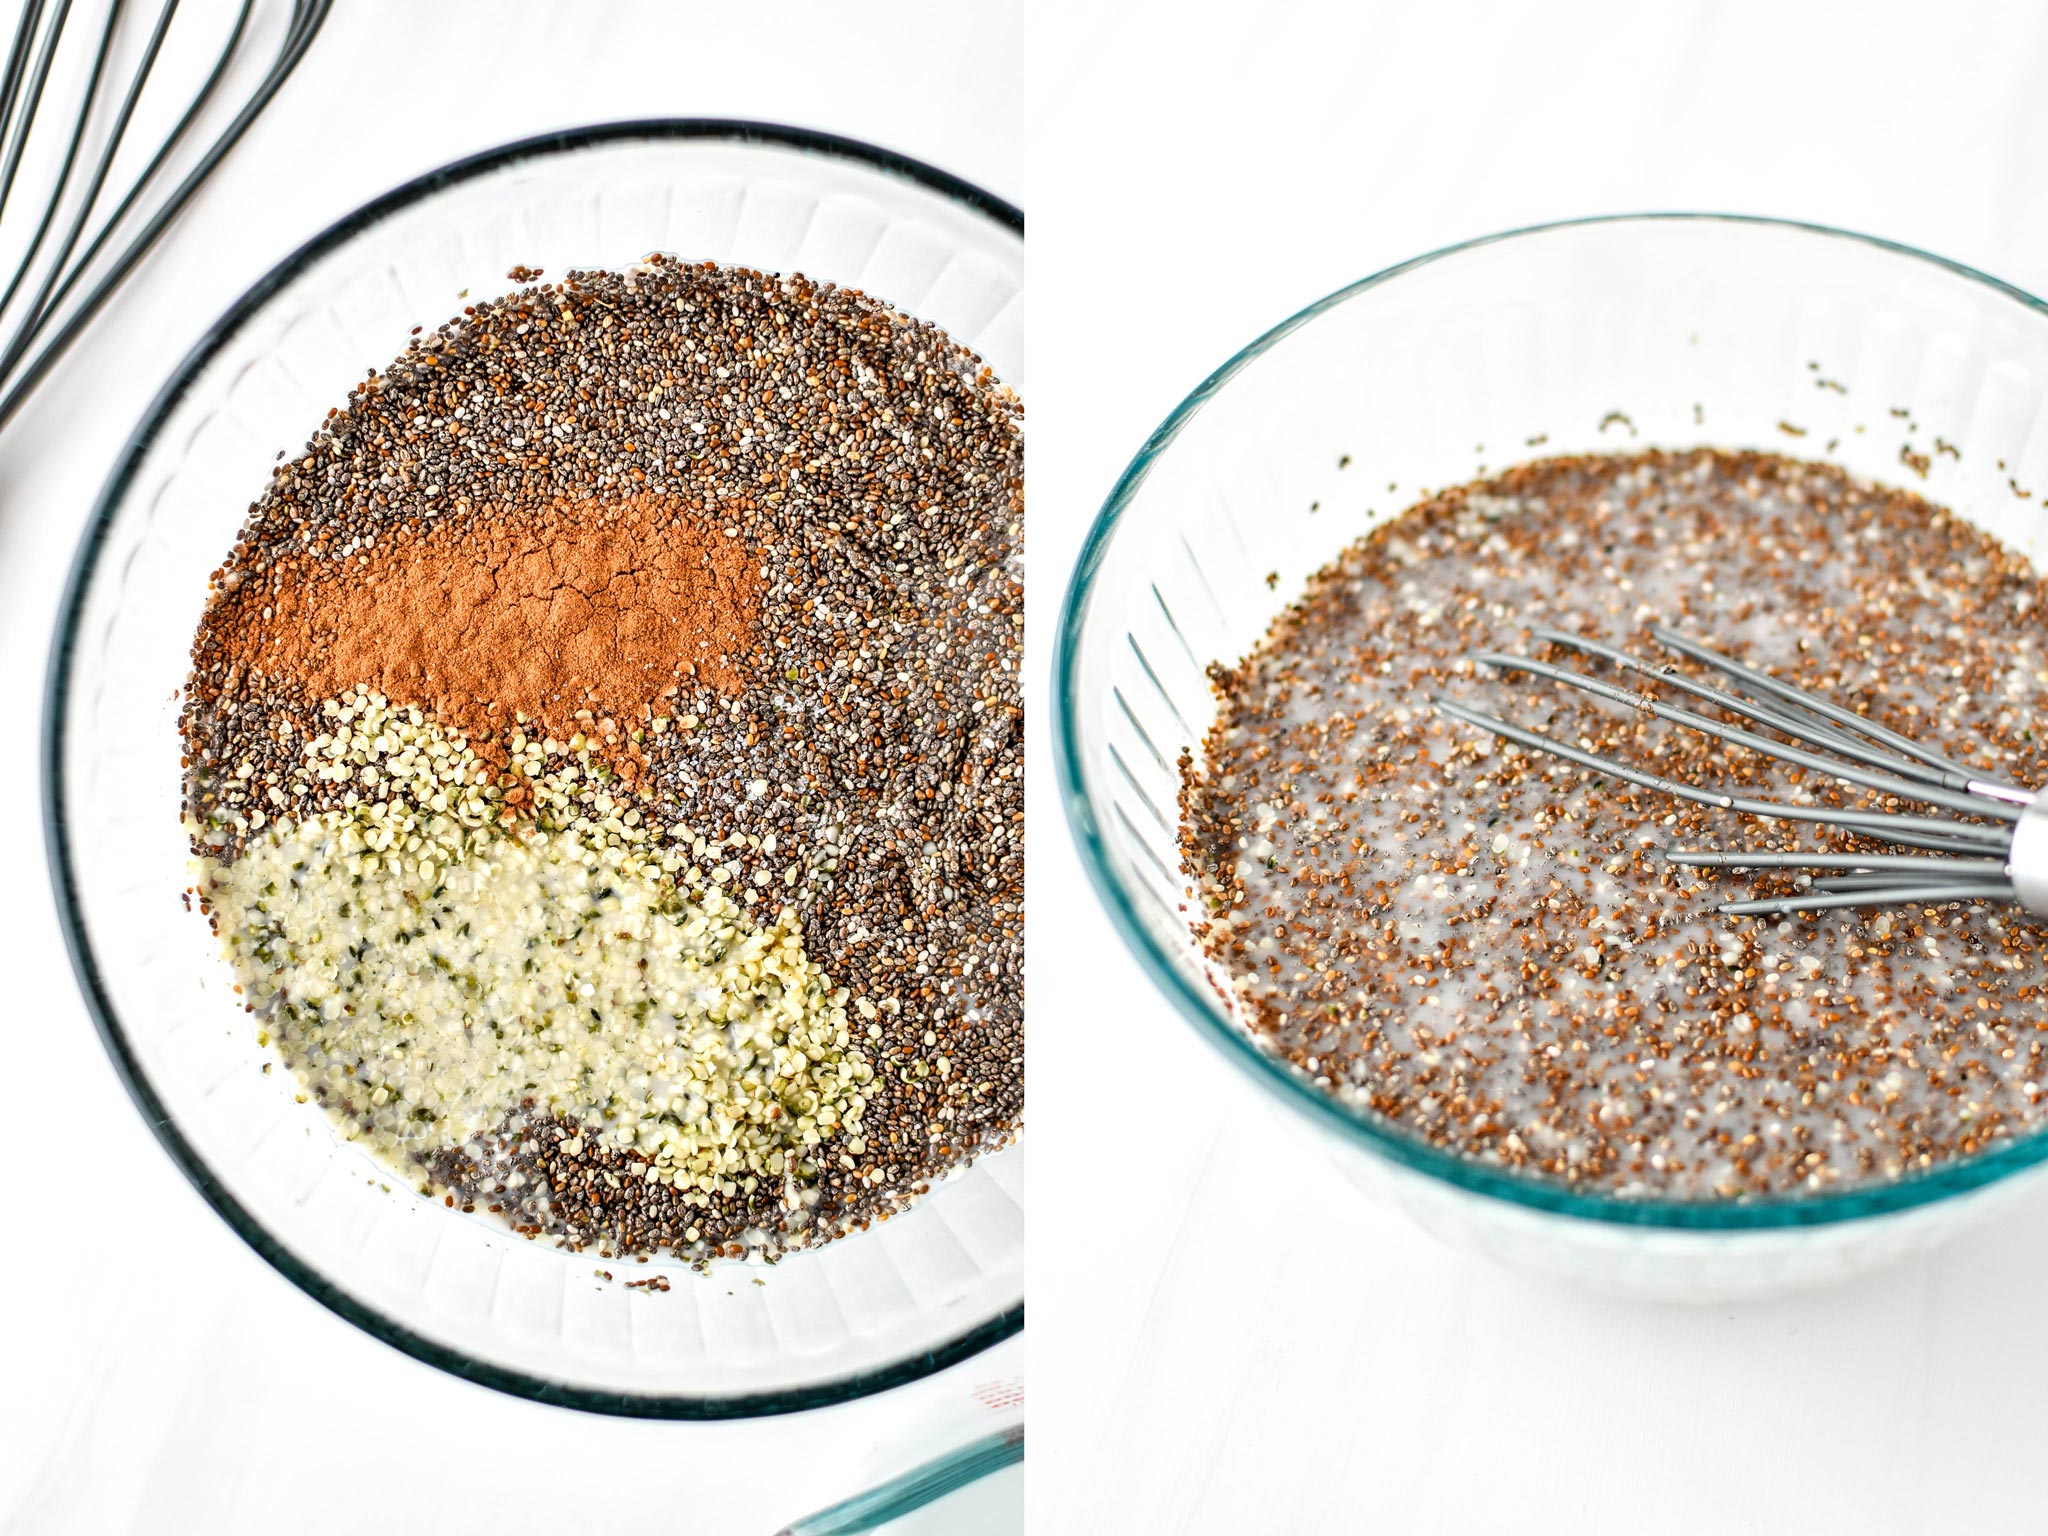 Mixing up chia seeds with almond milk to create chia pudding breakfast parfaits.